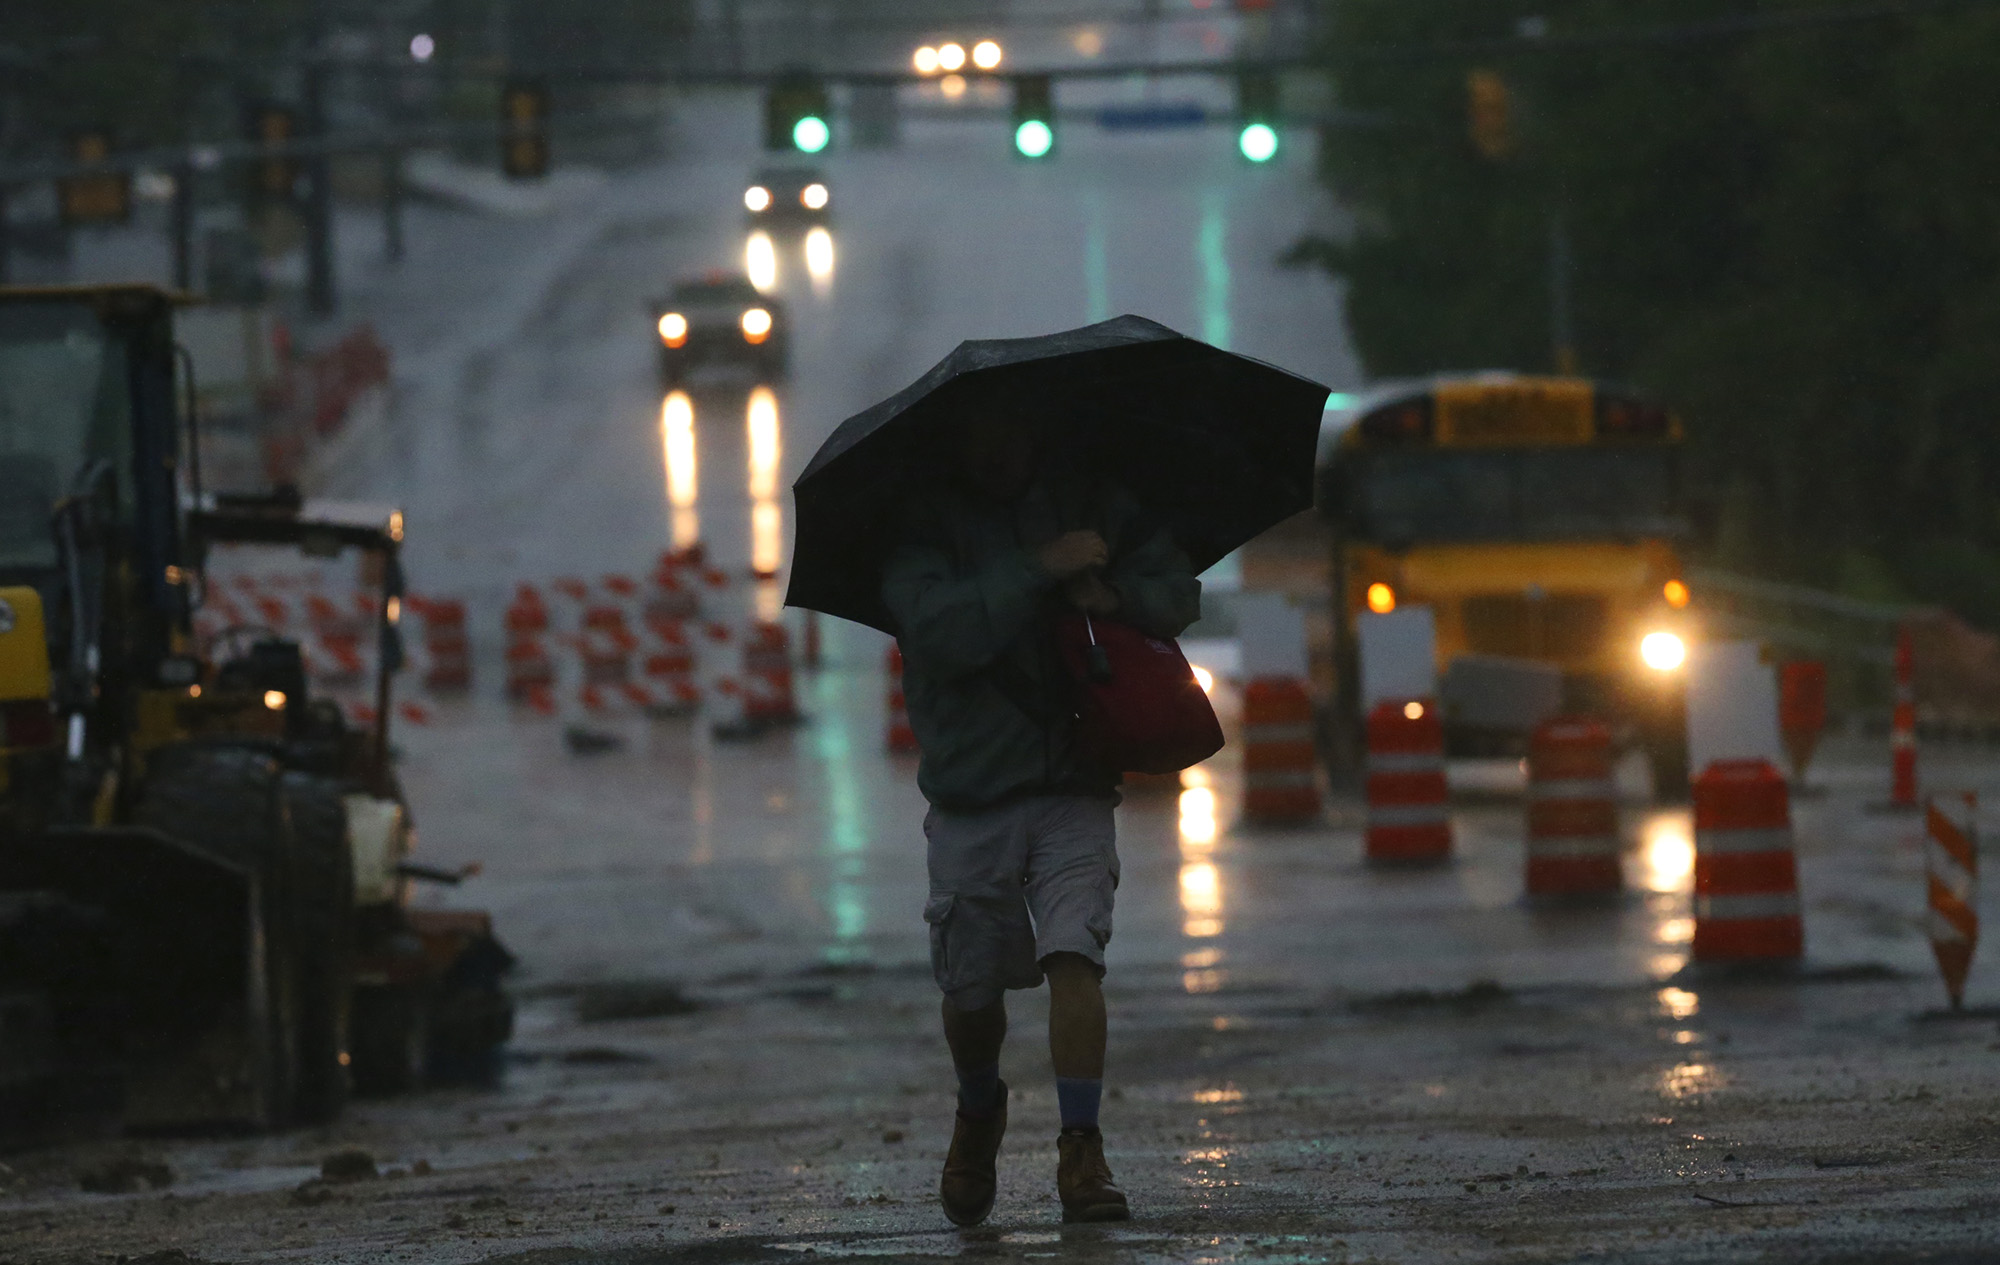 Heavy rain from incoming cold front likely for San Antonio area - San Antonio Express-News